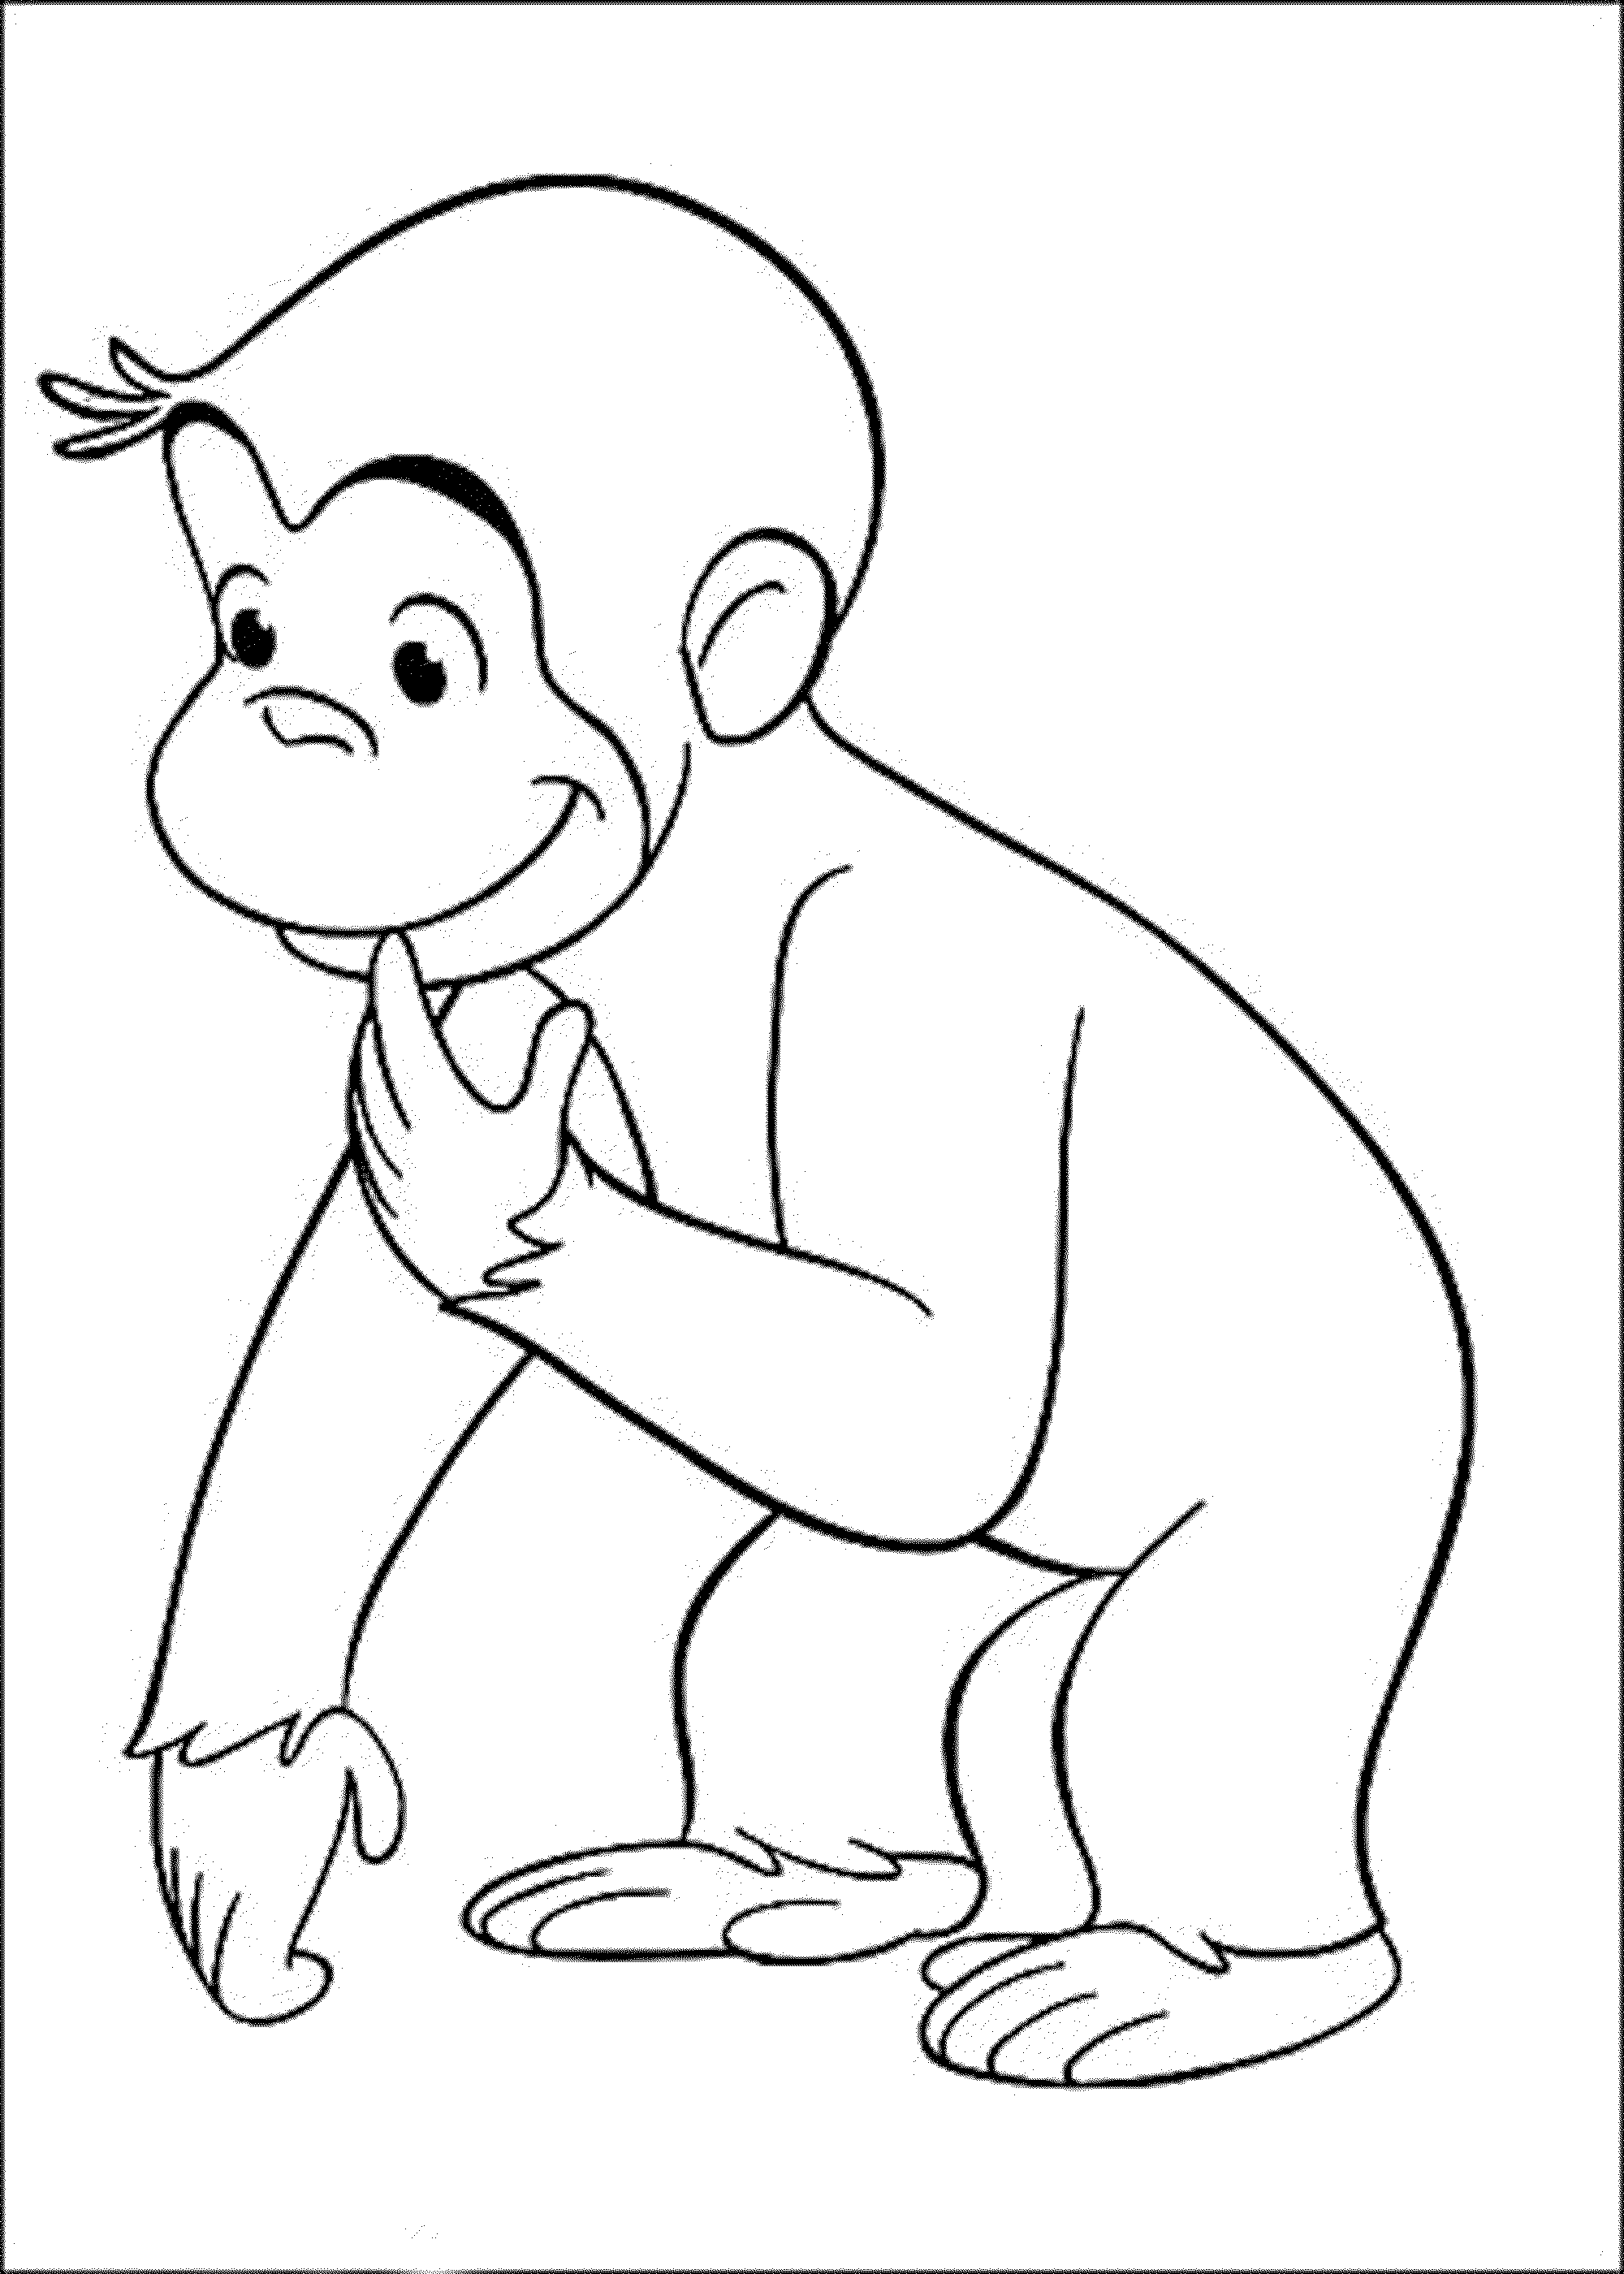 print-download-curious-george-coloring-pages-to-stimulate-kids